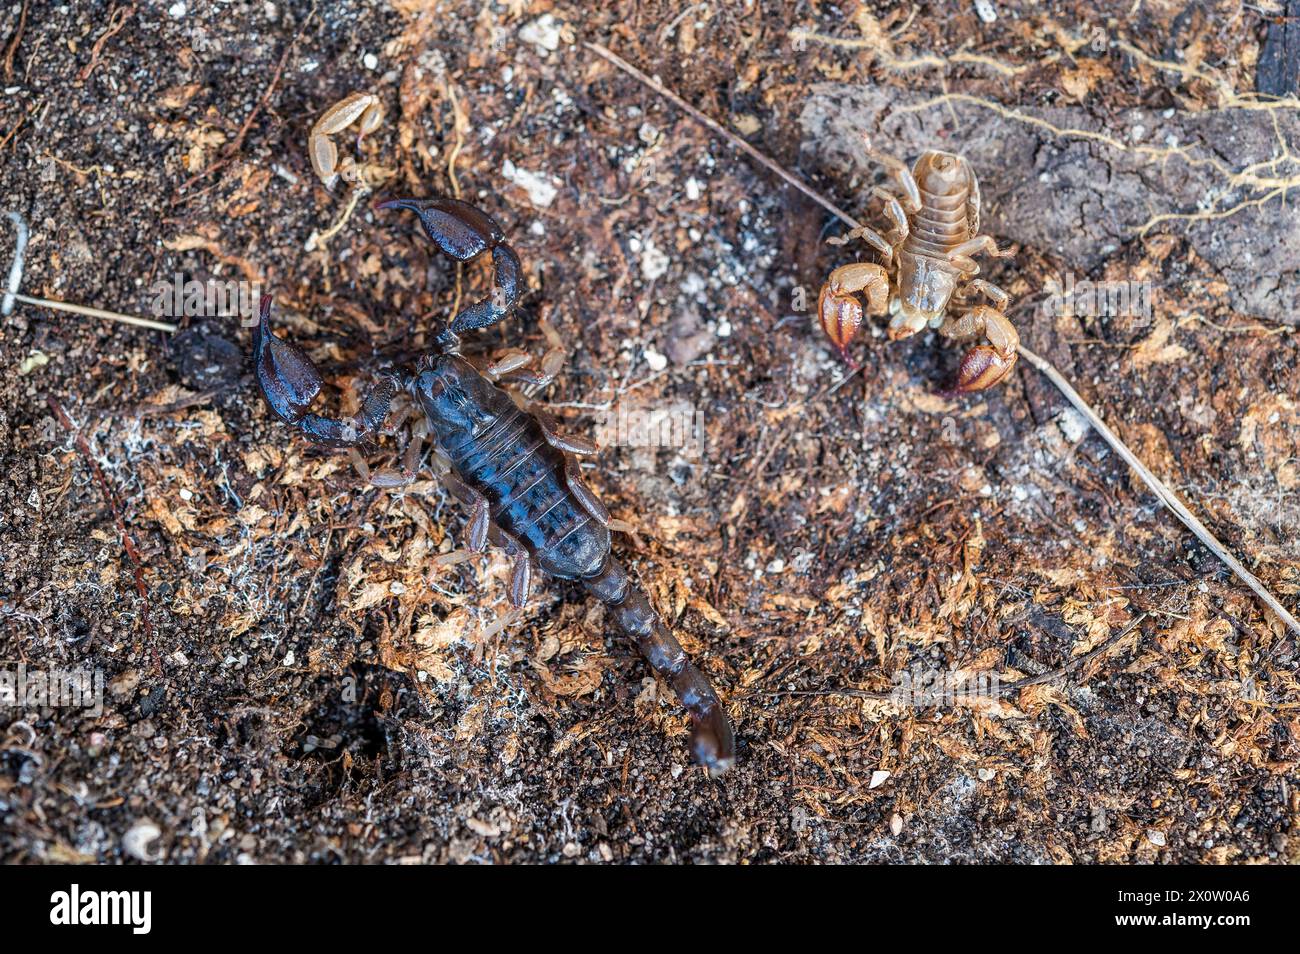 Urodacus manicatus, commonly known as the black rock scorpion, is a species of scorpion belonging to the family Urodacidae, with its molt Stock Photo